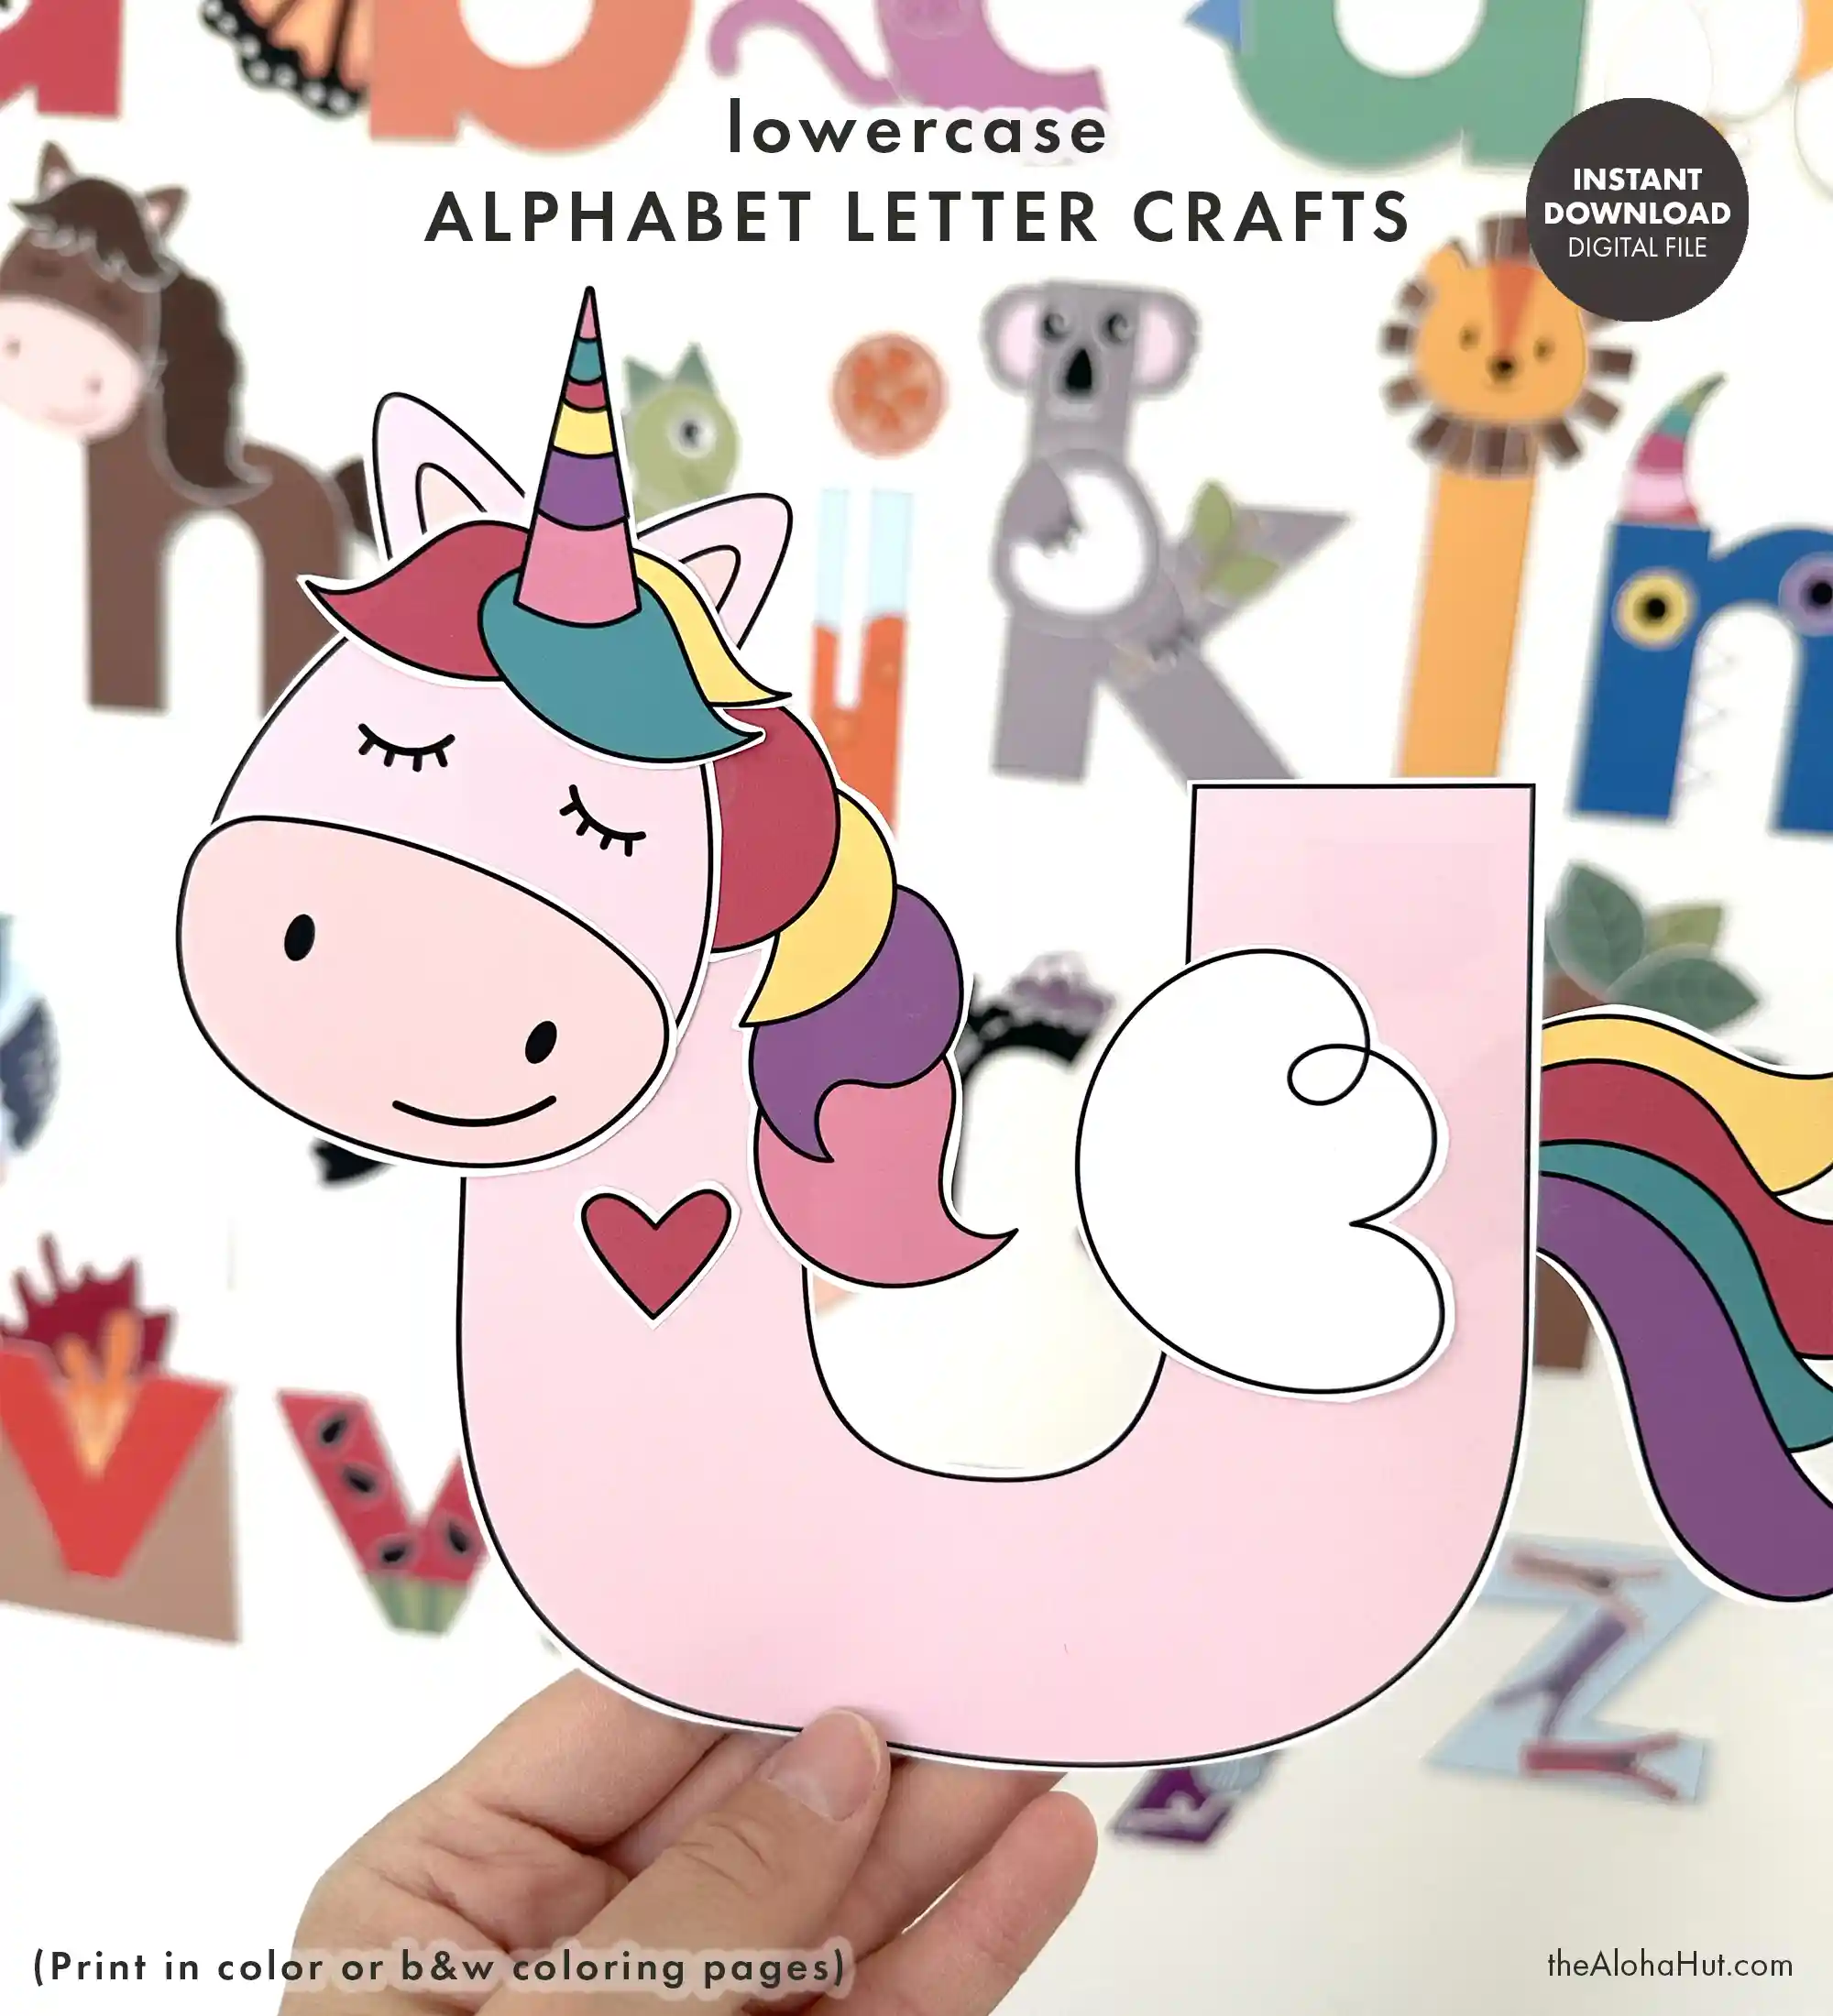 Lowercase alphabet letter crafts for kids, toddlers, and preschool children. Download, print, color, and assemble the lowercase alphabet letters for a fun and hands on activity to help your toddler or preschooler learn their abcs. Make your own alphabet wall as a fun preschool activity and to add to a DIY alphabet book.